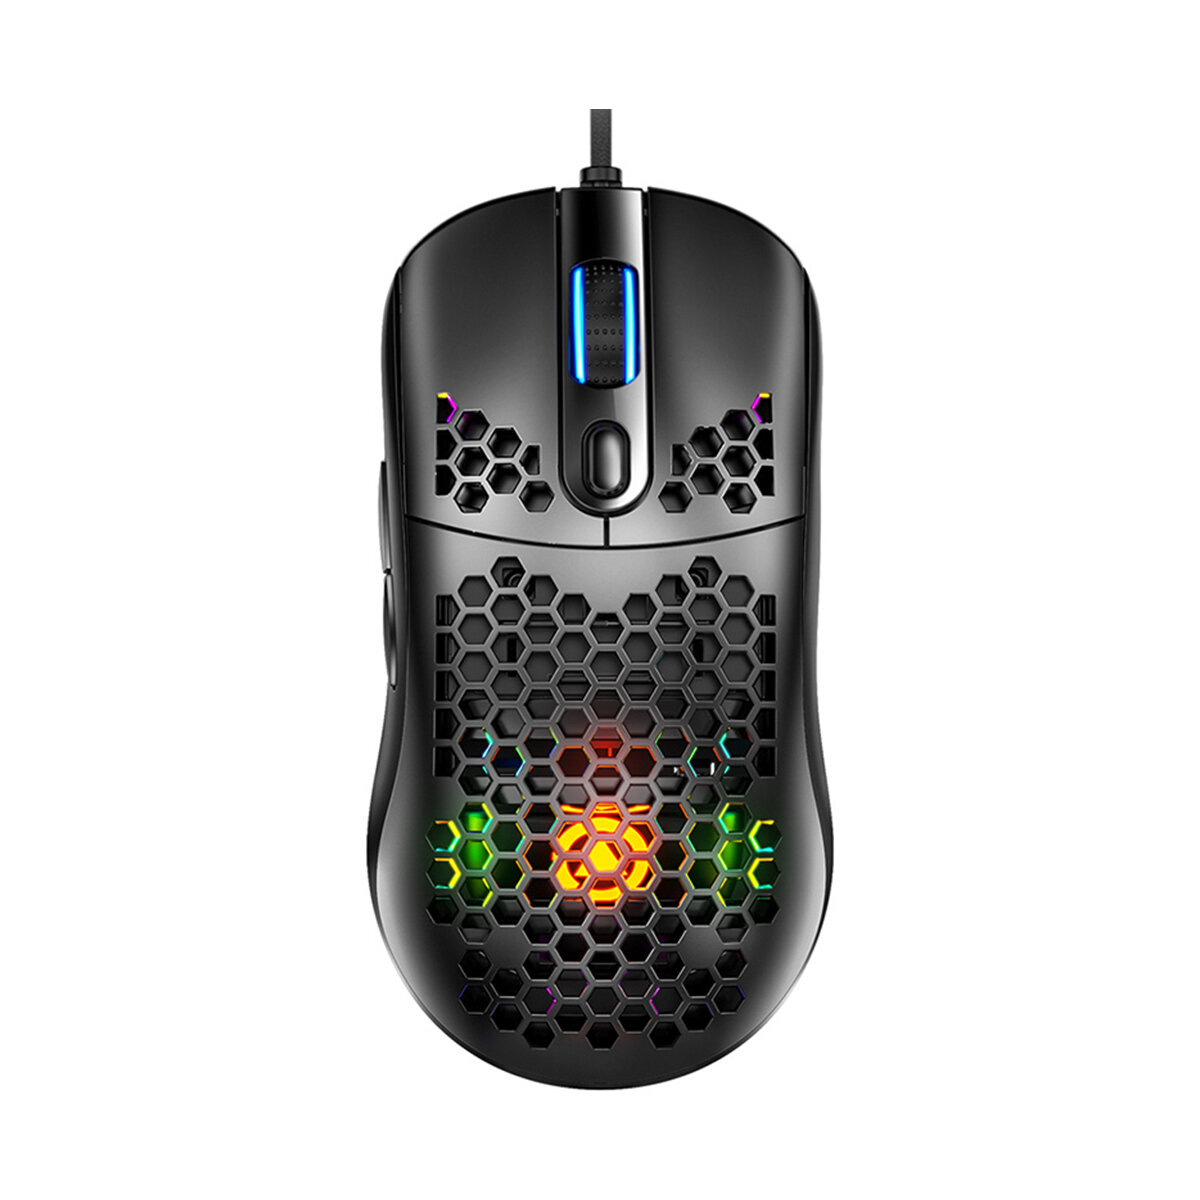 YINDIAO G7 Wired Gaming Mouse 7200DPI RGB Backlight Computer Mouse Honeycomb Hollow Mice for Compute